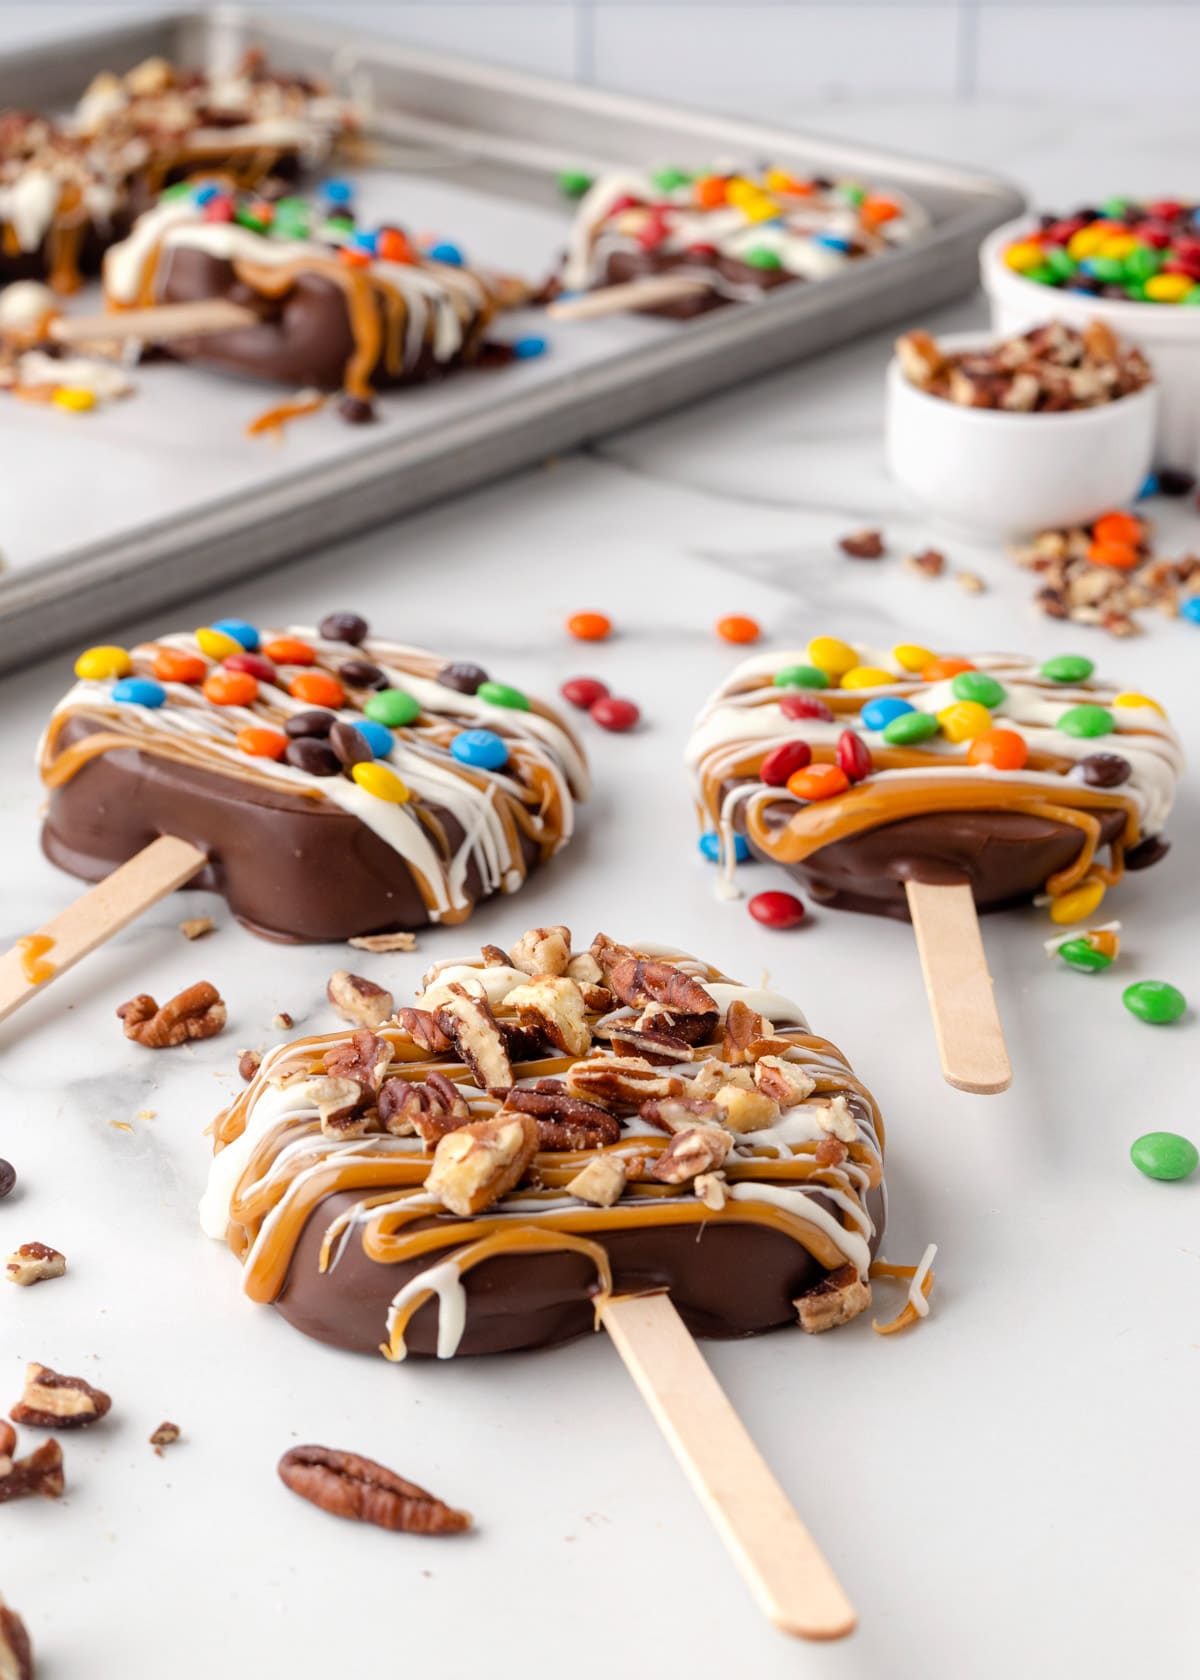 chocolate covered caramel apple slices decorated with candies and nuts on a white marble countertop